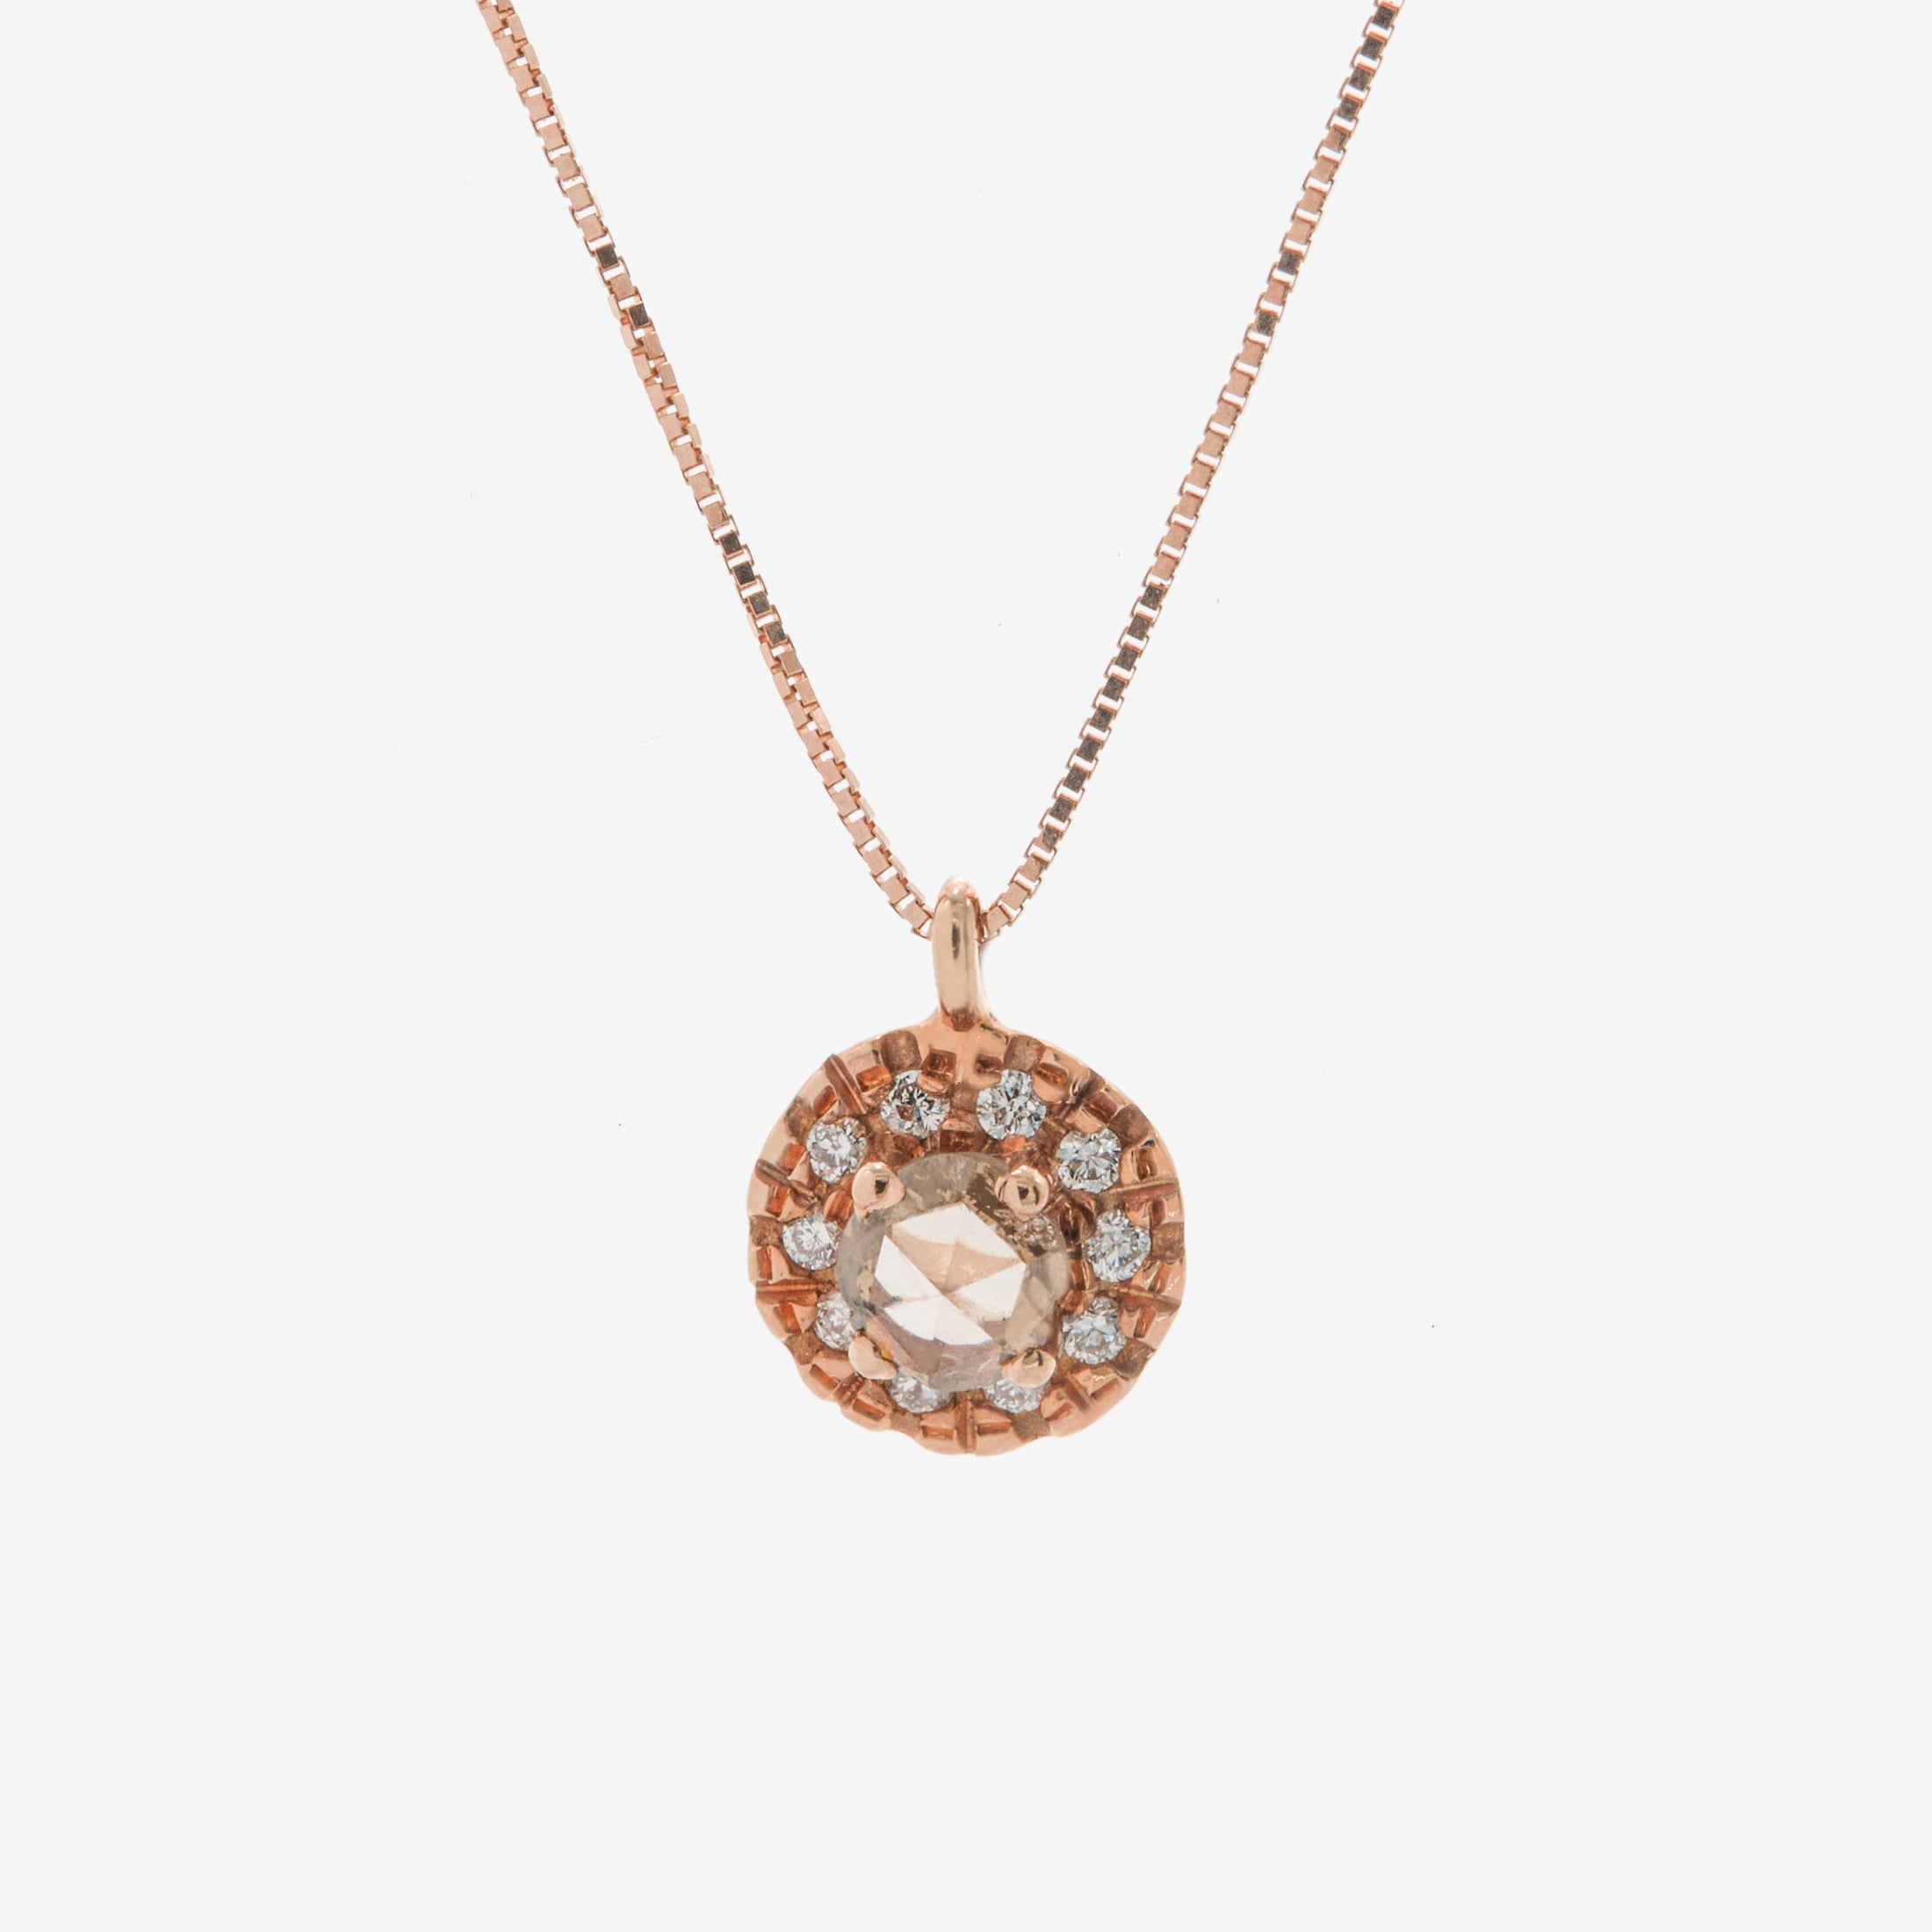 Rose gold necklace with brown diamond